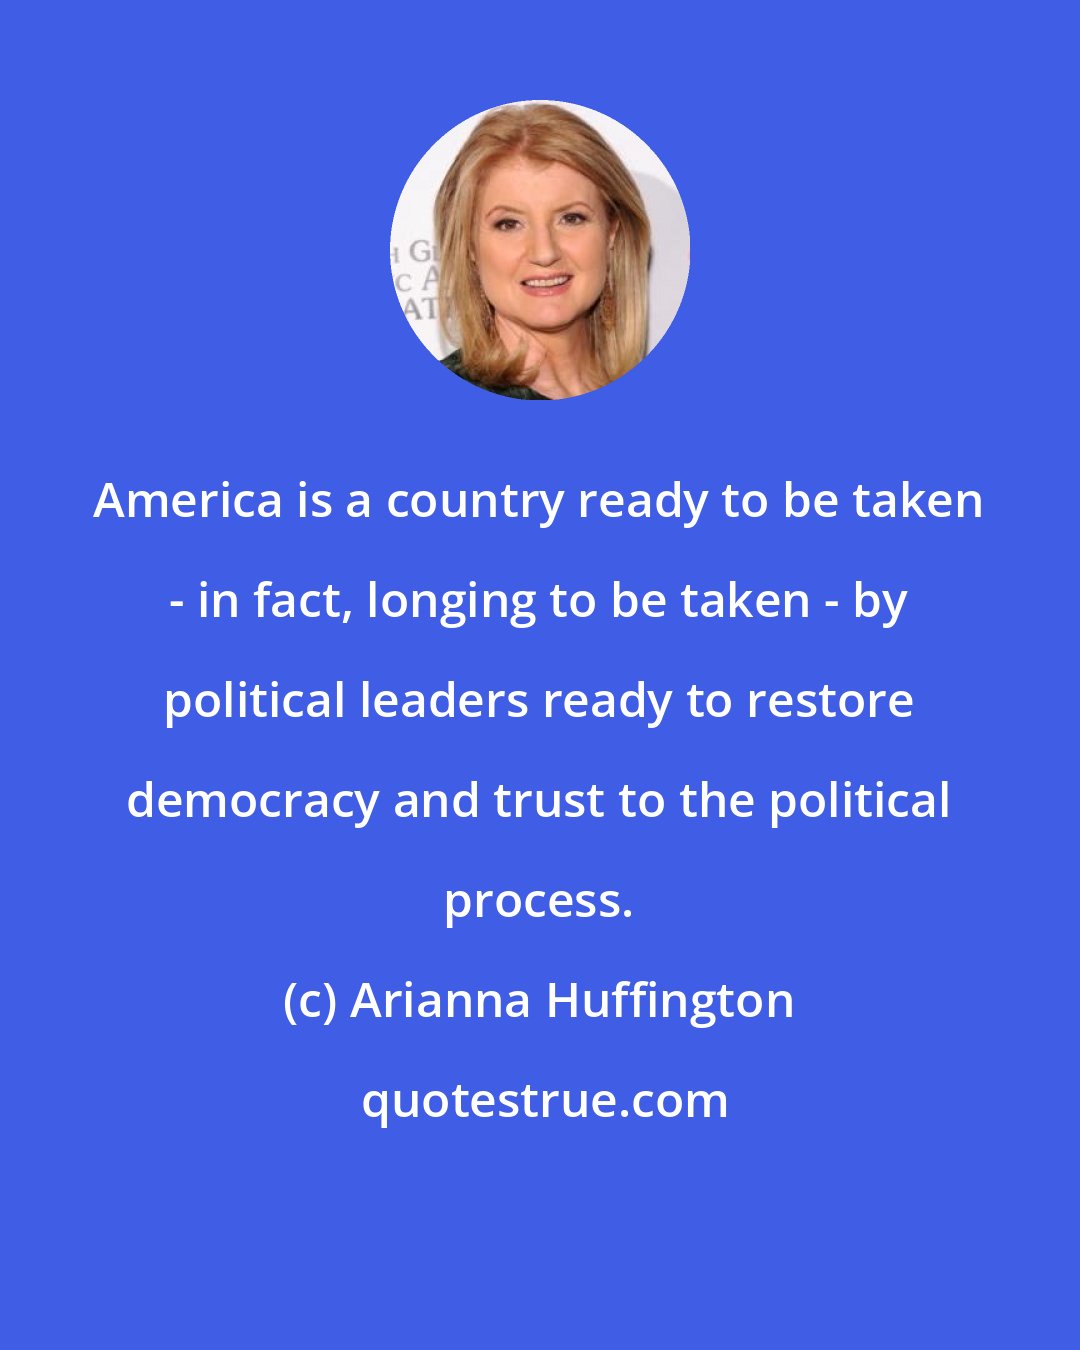 Arianna Huffington: America is a country ready to be taken - in fact, longing to be taken - by political leaders ready to restore democracy and trust to the political process.